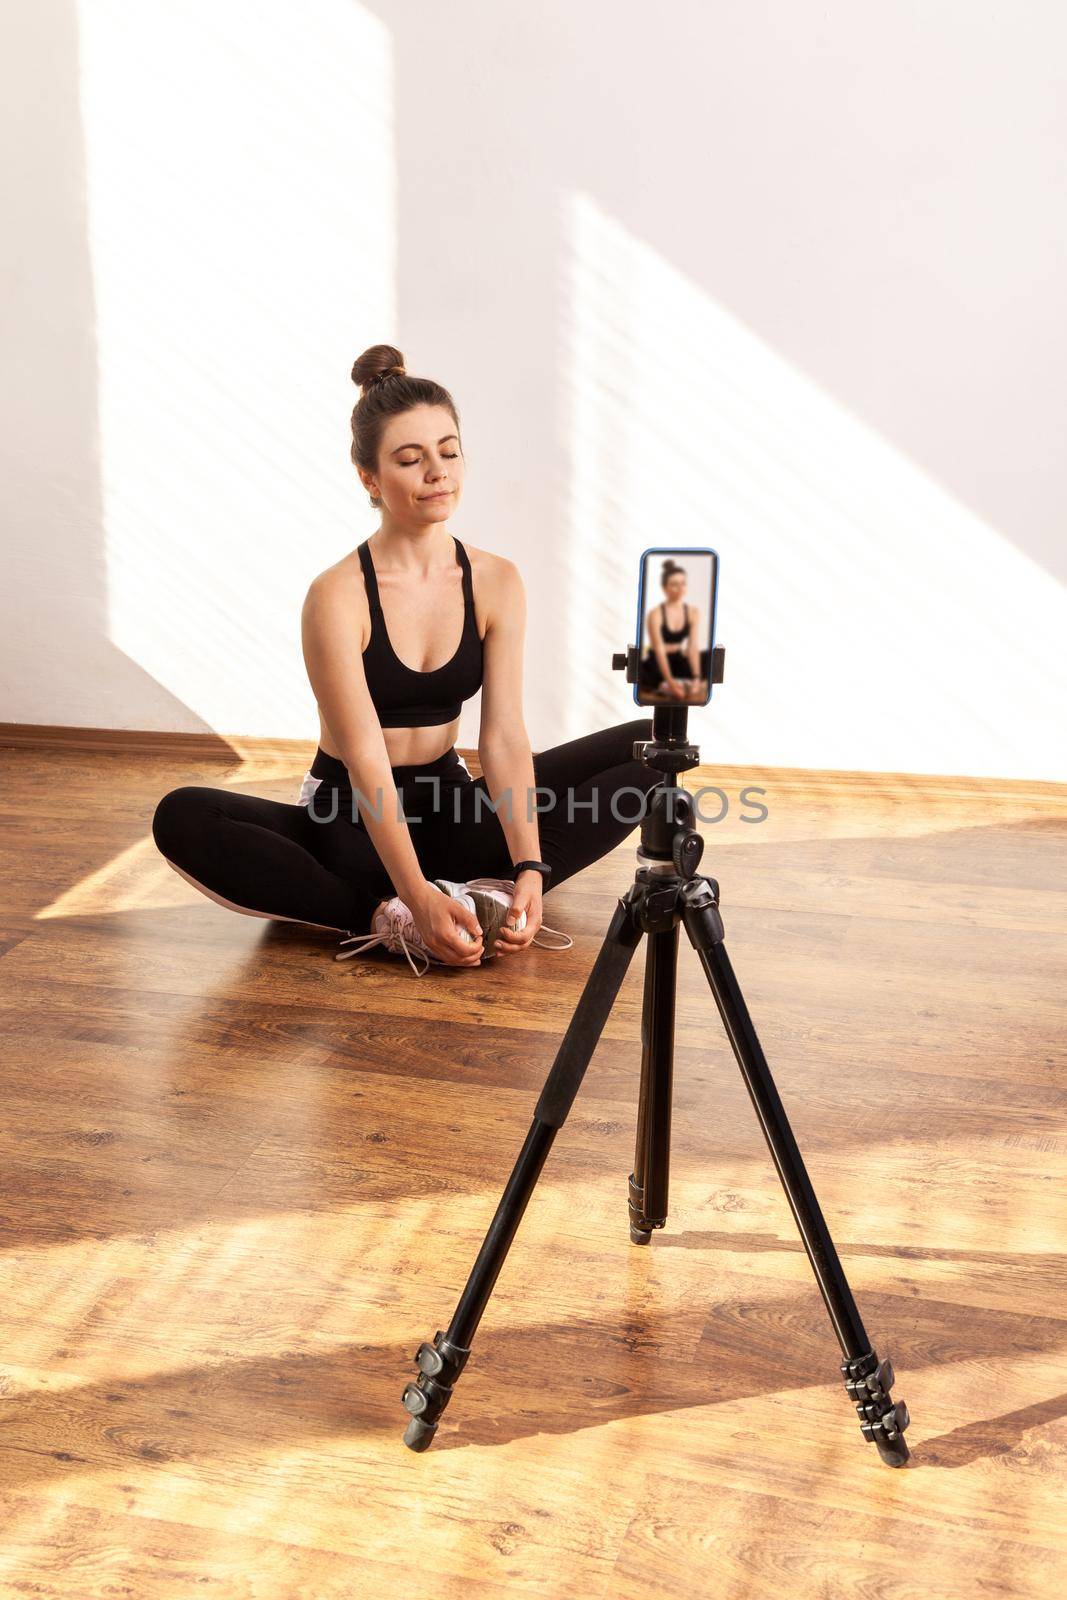 Girl recording online class of relaxing after training, sitting on lotus pose, keeps eyes closed, wearing black sports top and tights. Full length studio shot illuminated by sunlight from window.